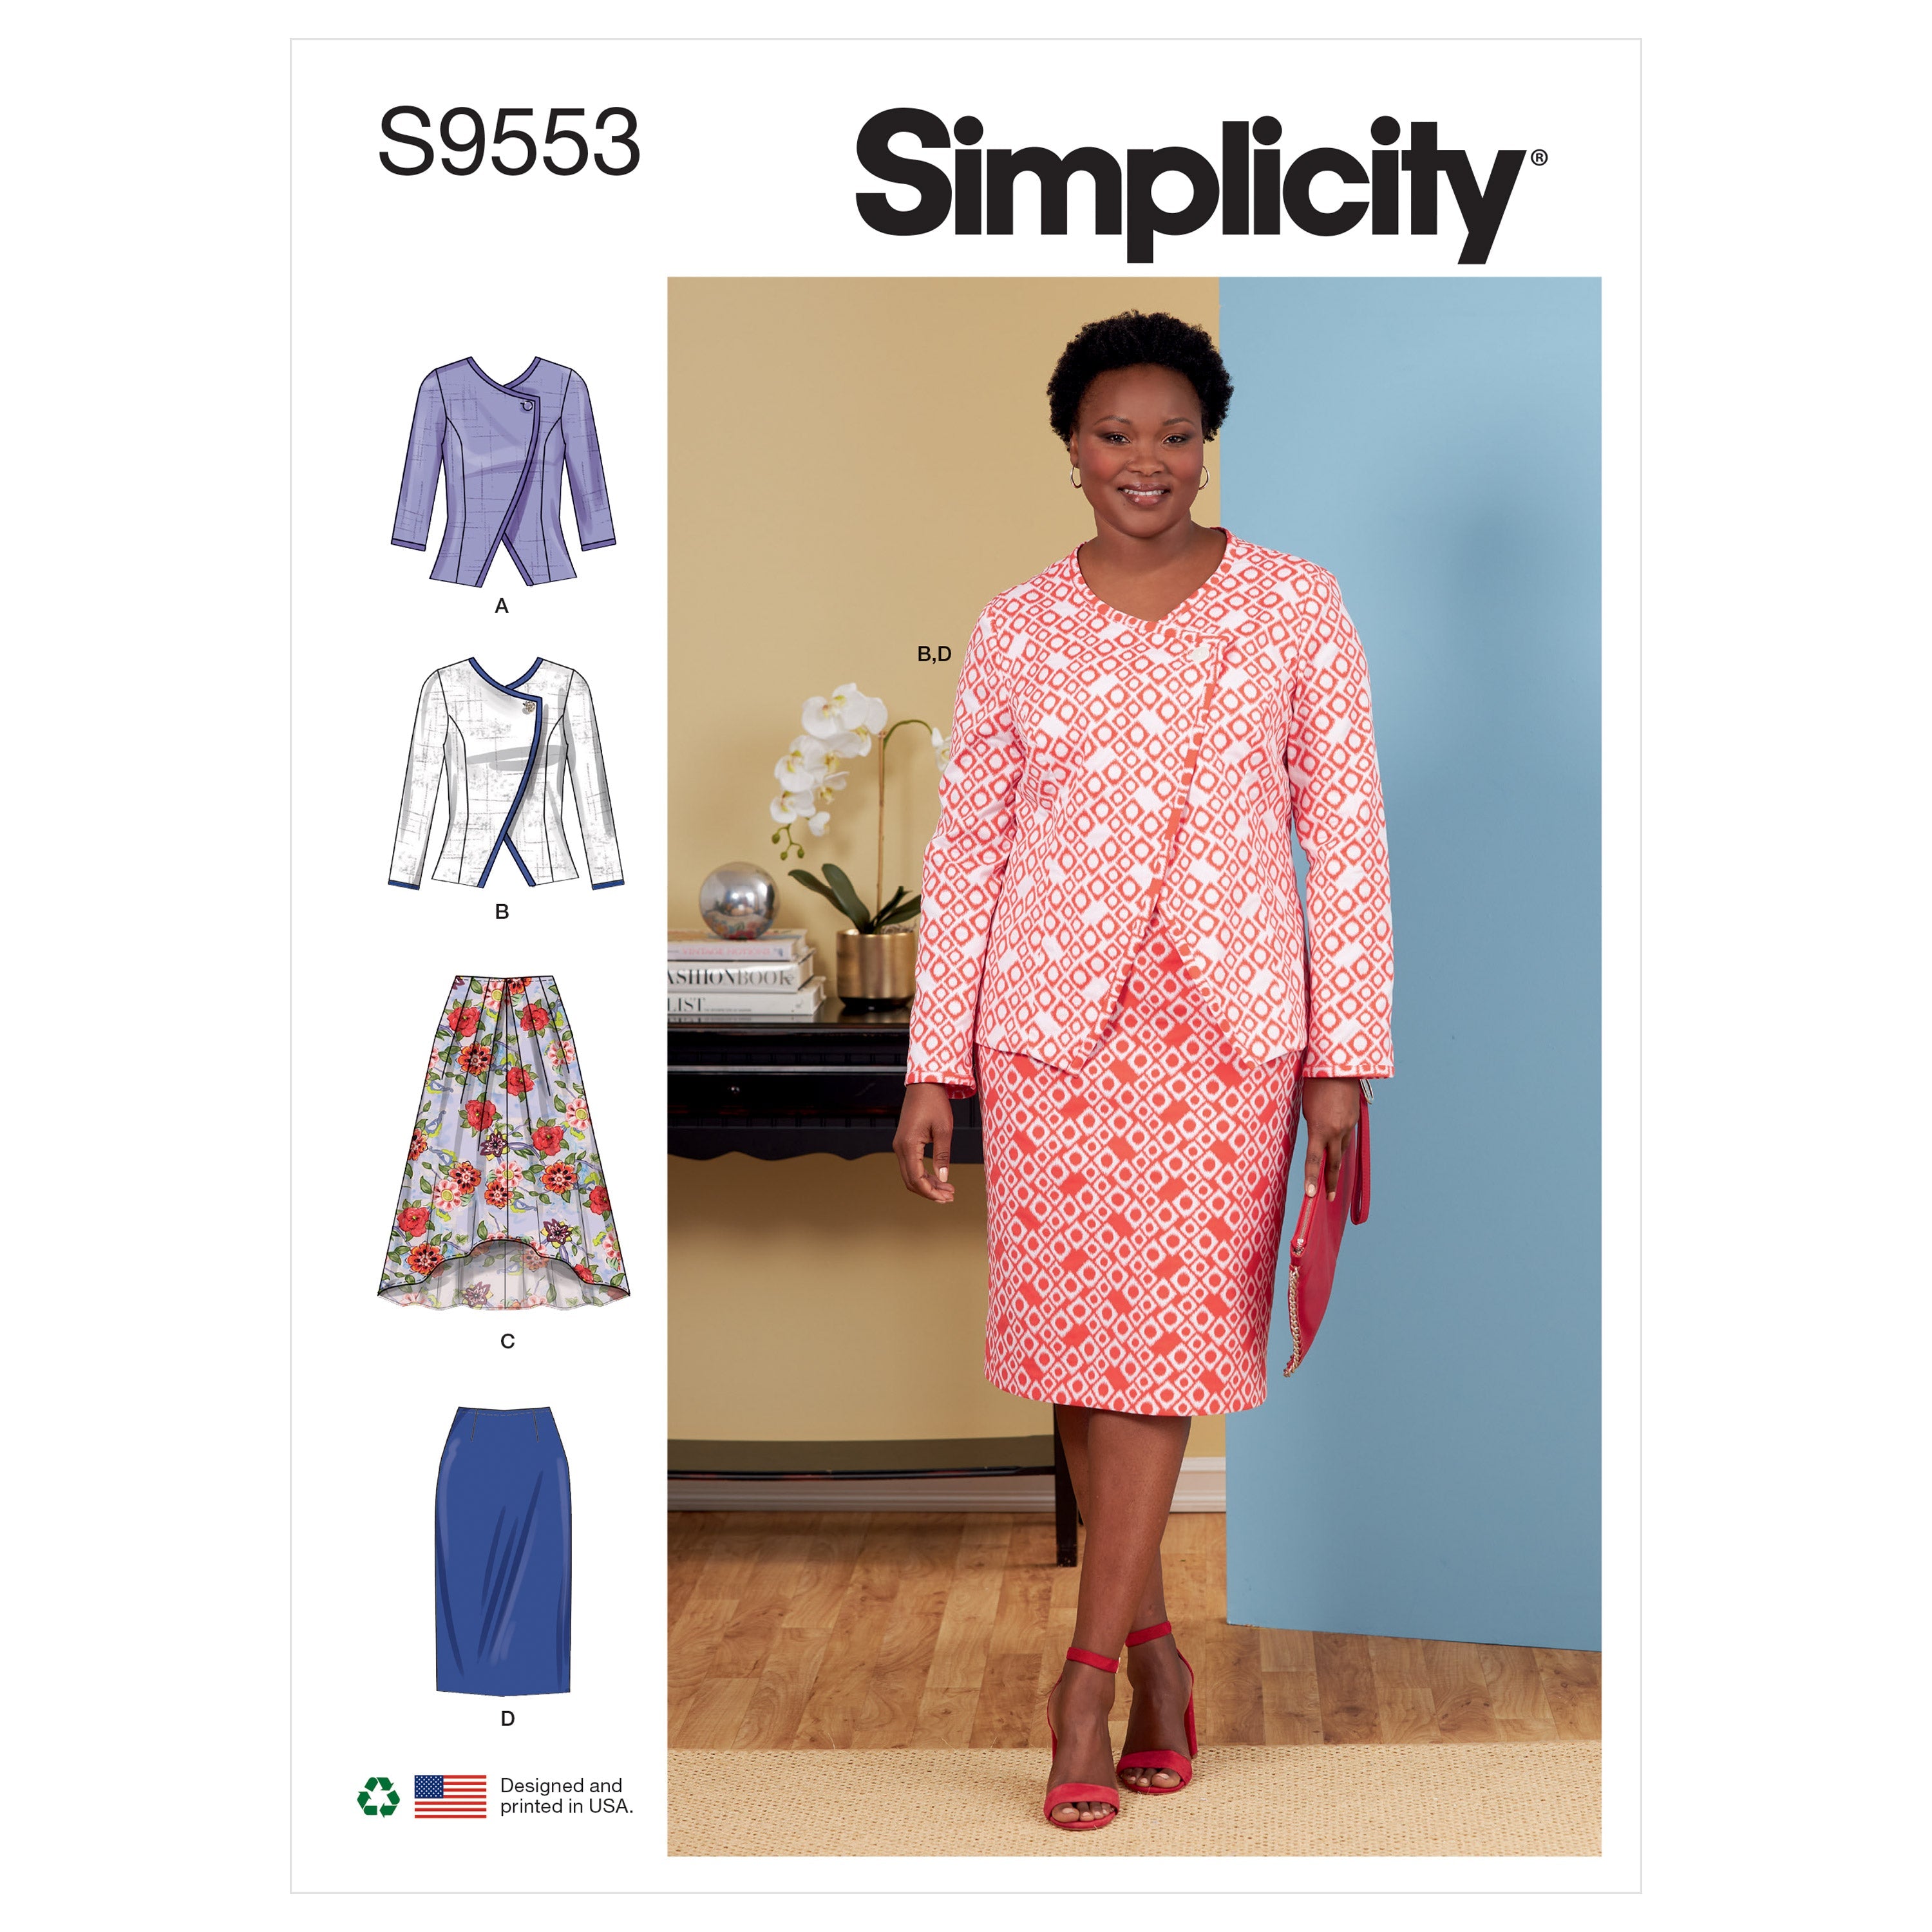 Simplicity 9553 Women's Jacket and Skirts pattern from Jaycotts Sewing Supplies